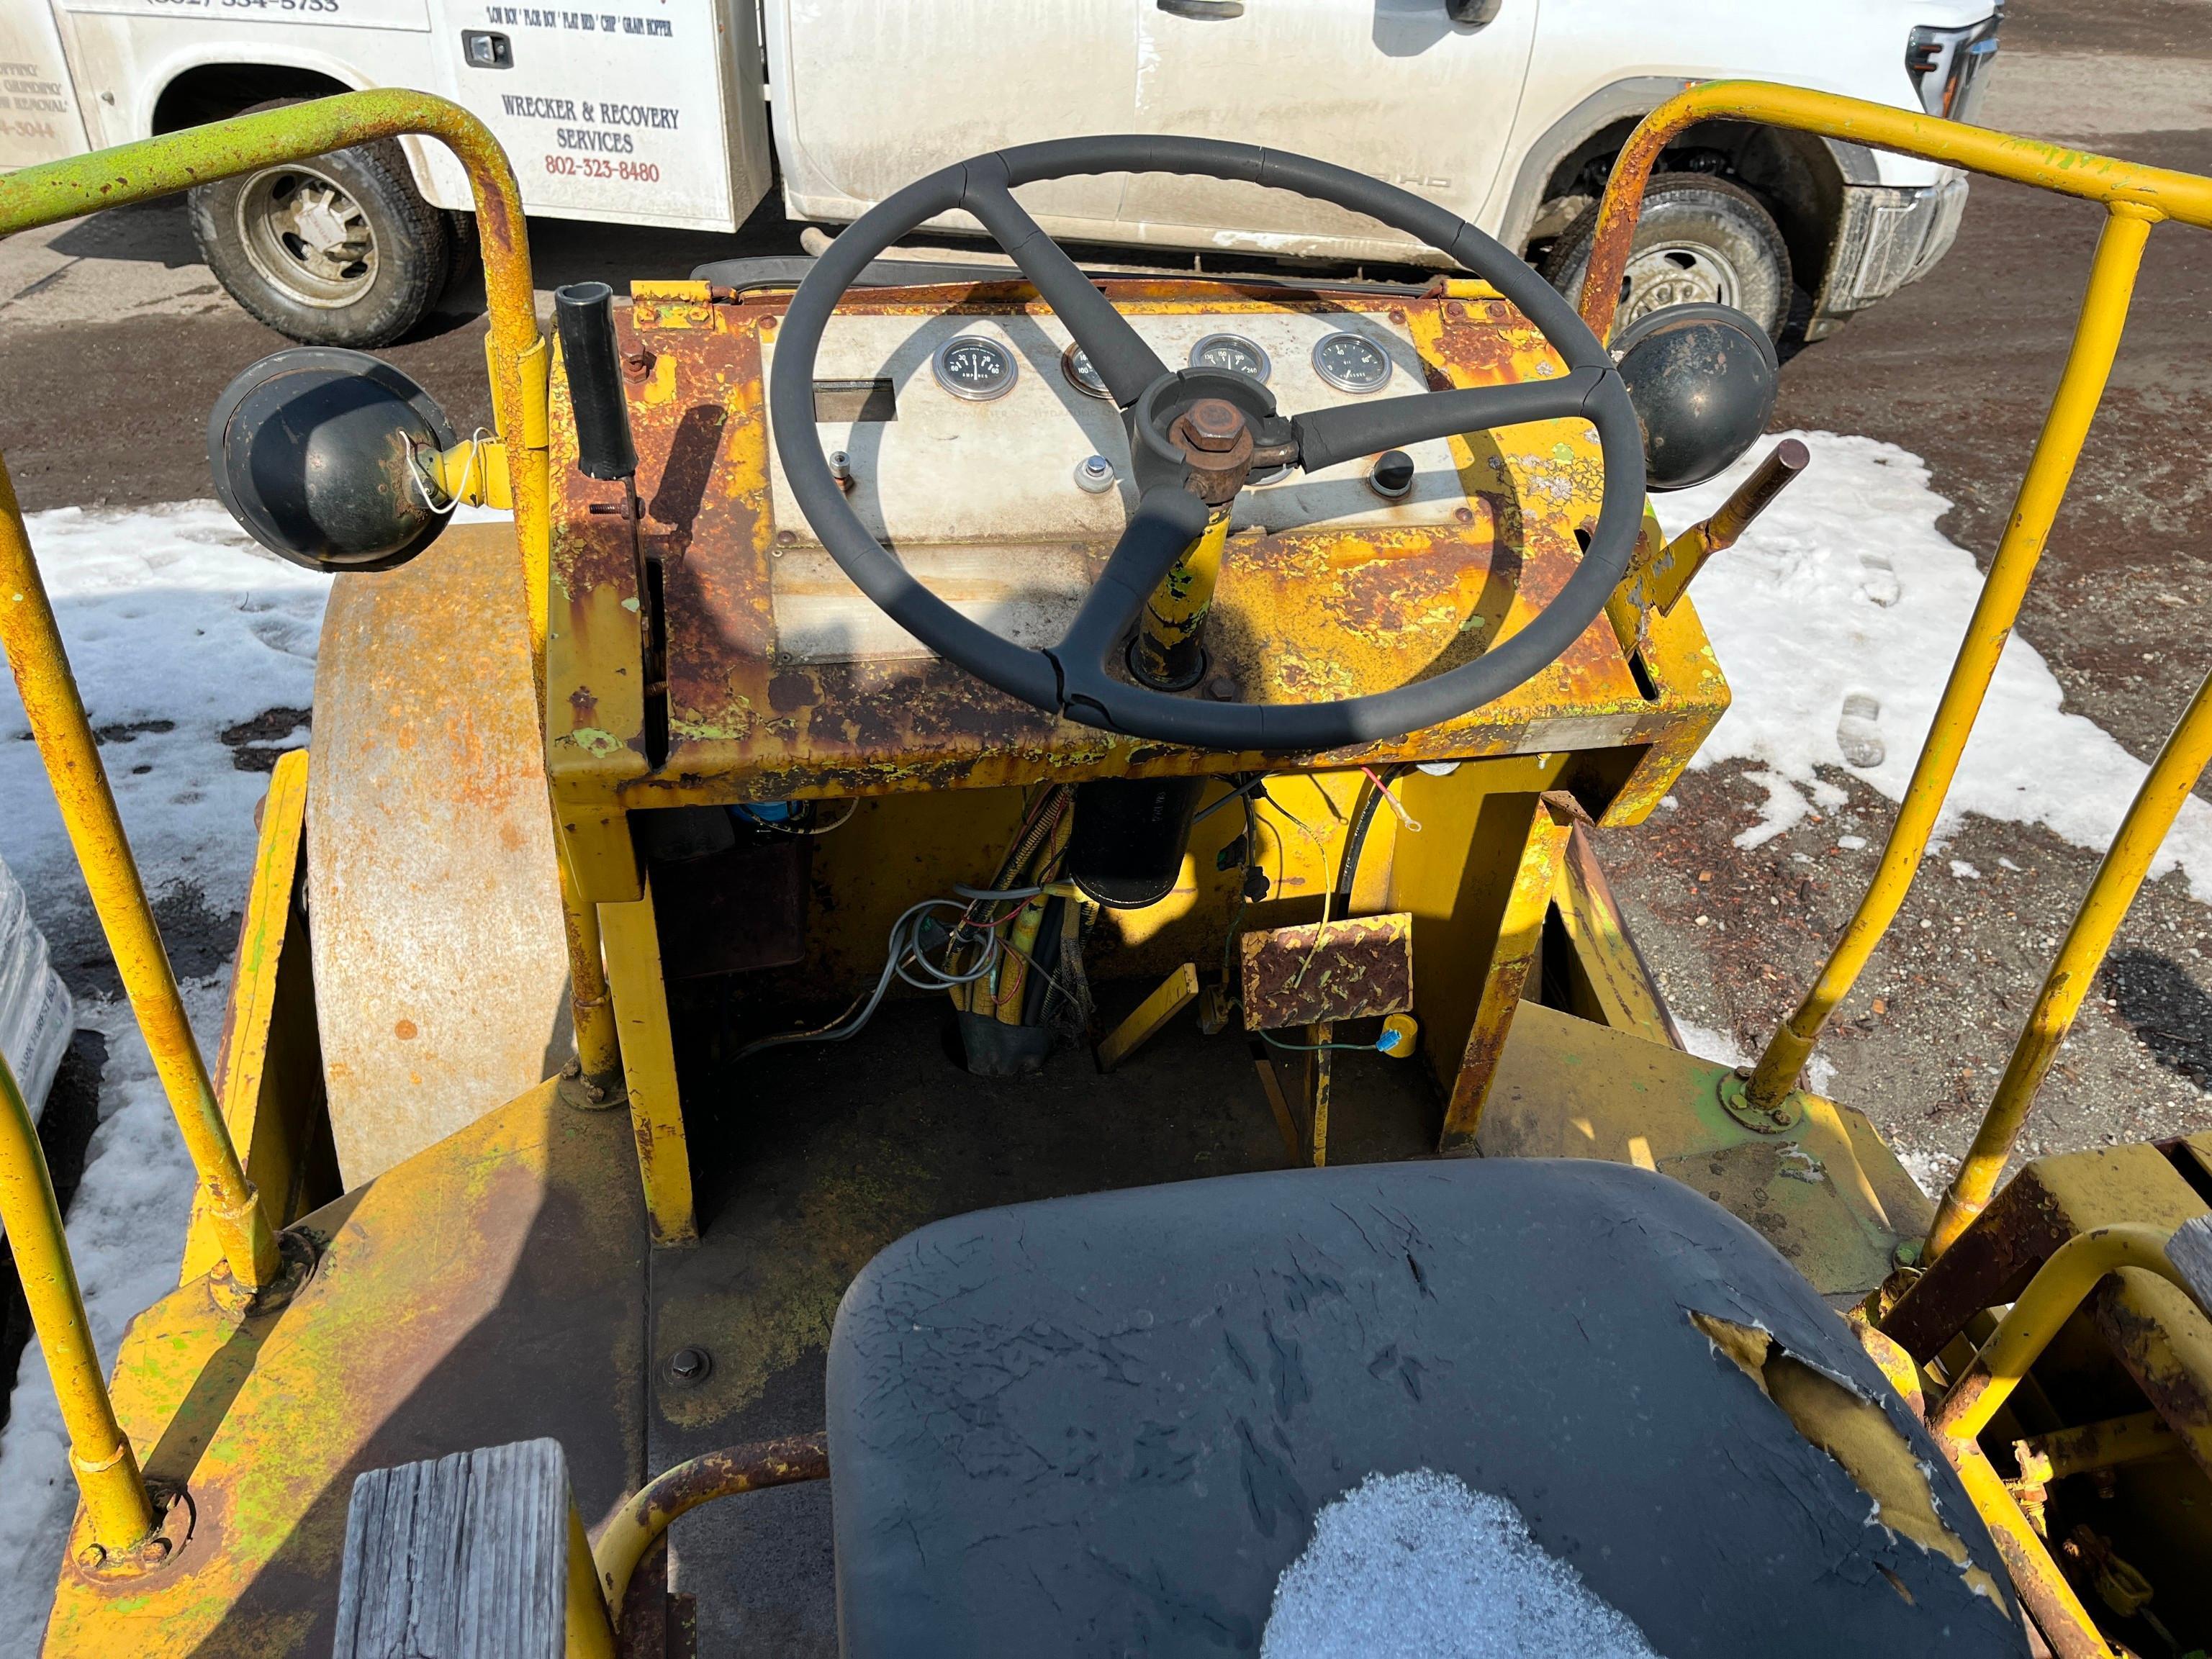 RAYGO 320A VIBRATORY ROLLER powered by Detroit diesel engine, equipped with 60in. Smooth drum,